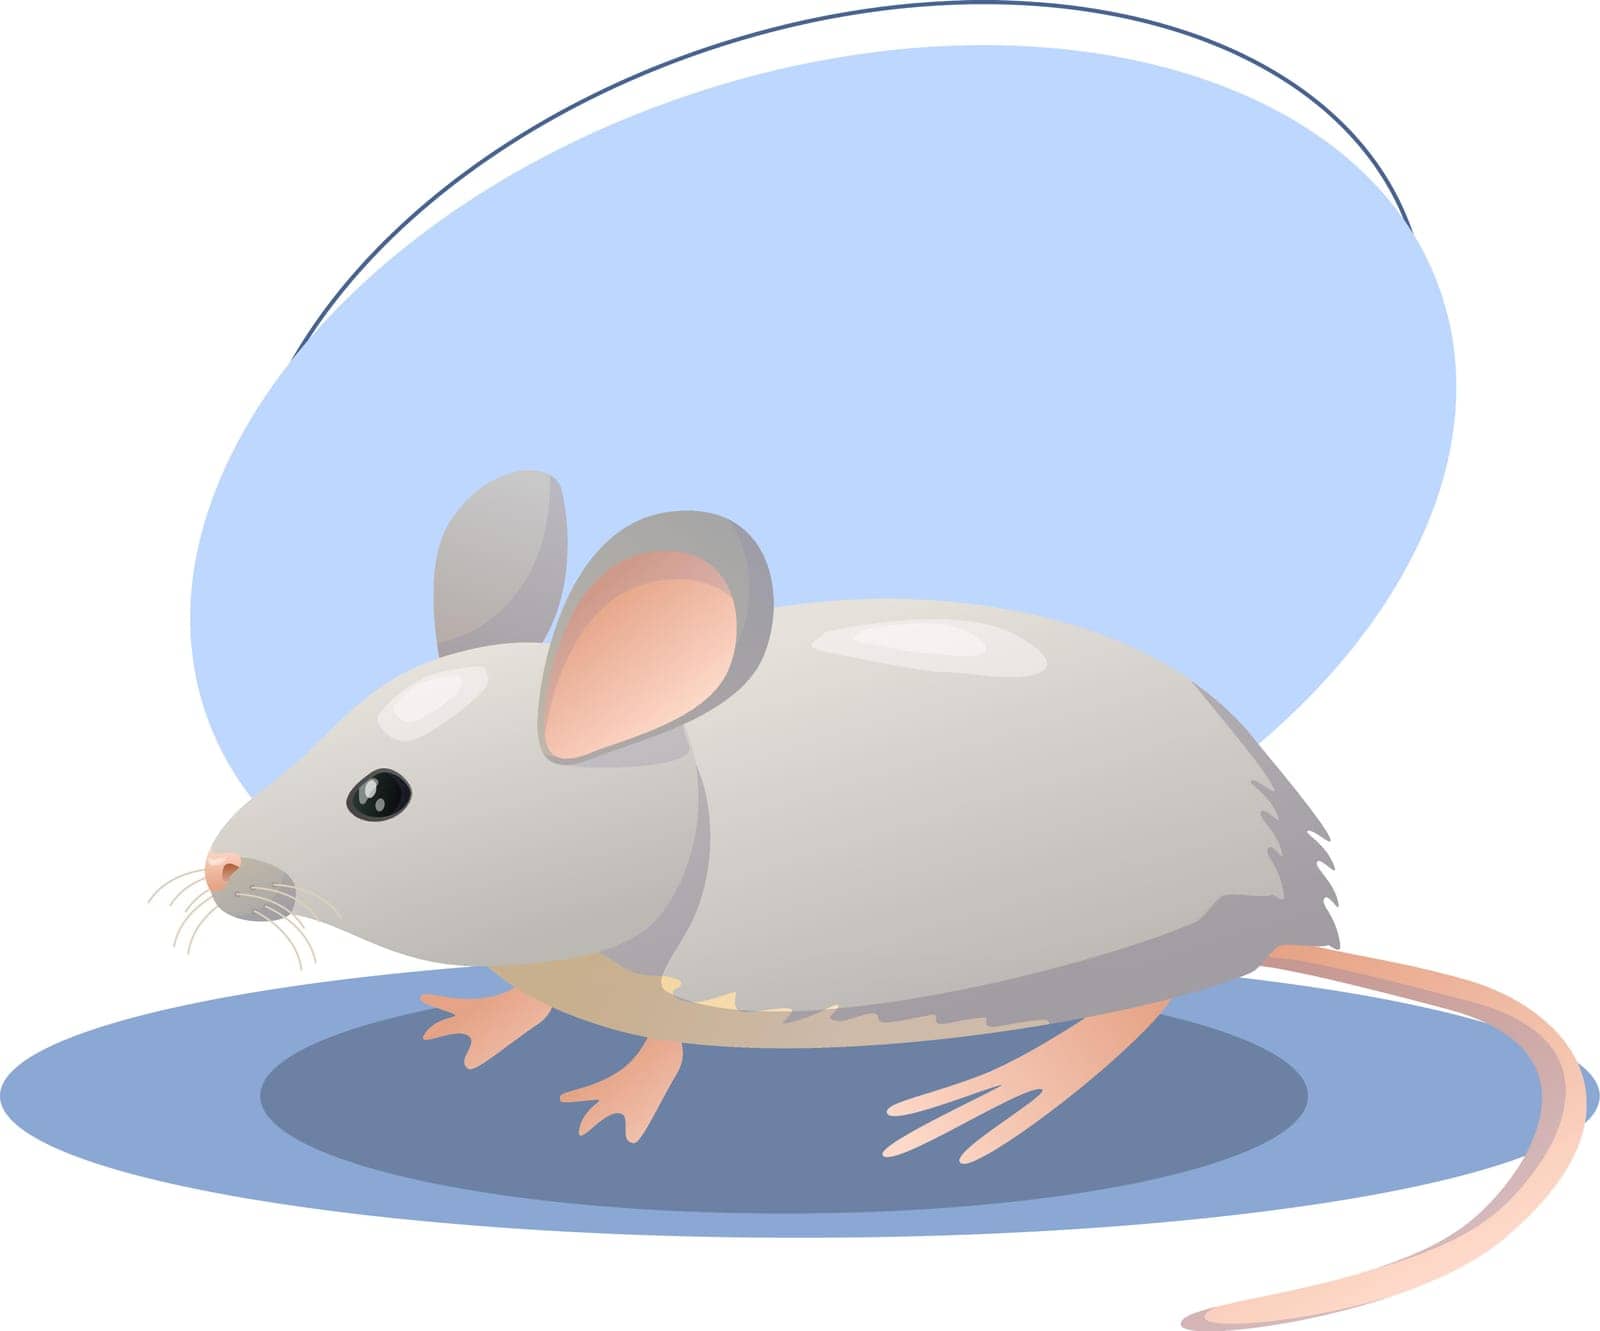 Mouse illustration. Animal, ears, tail, nose. Vector graphics.